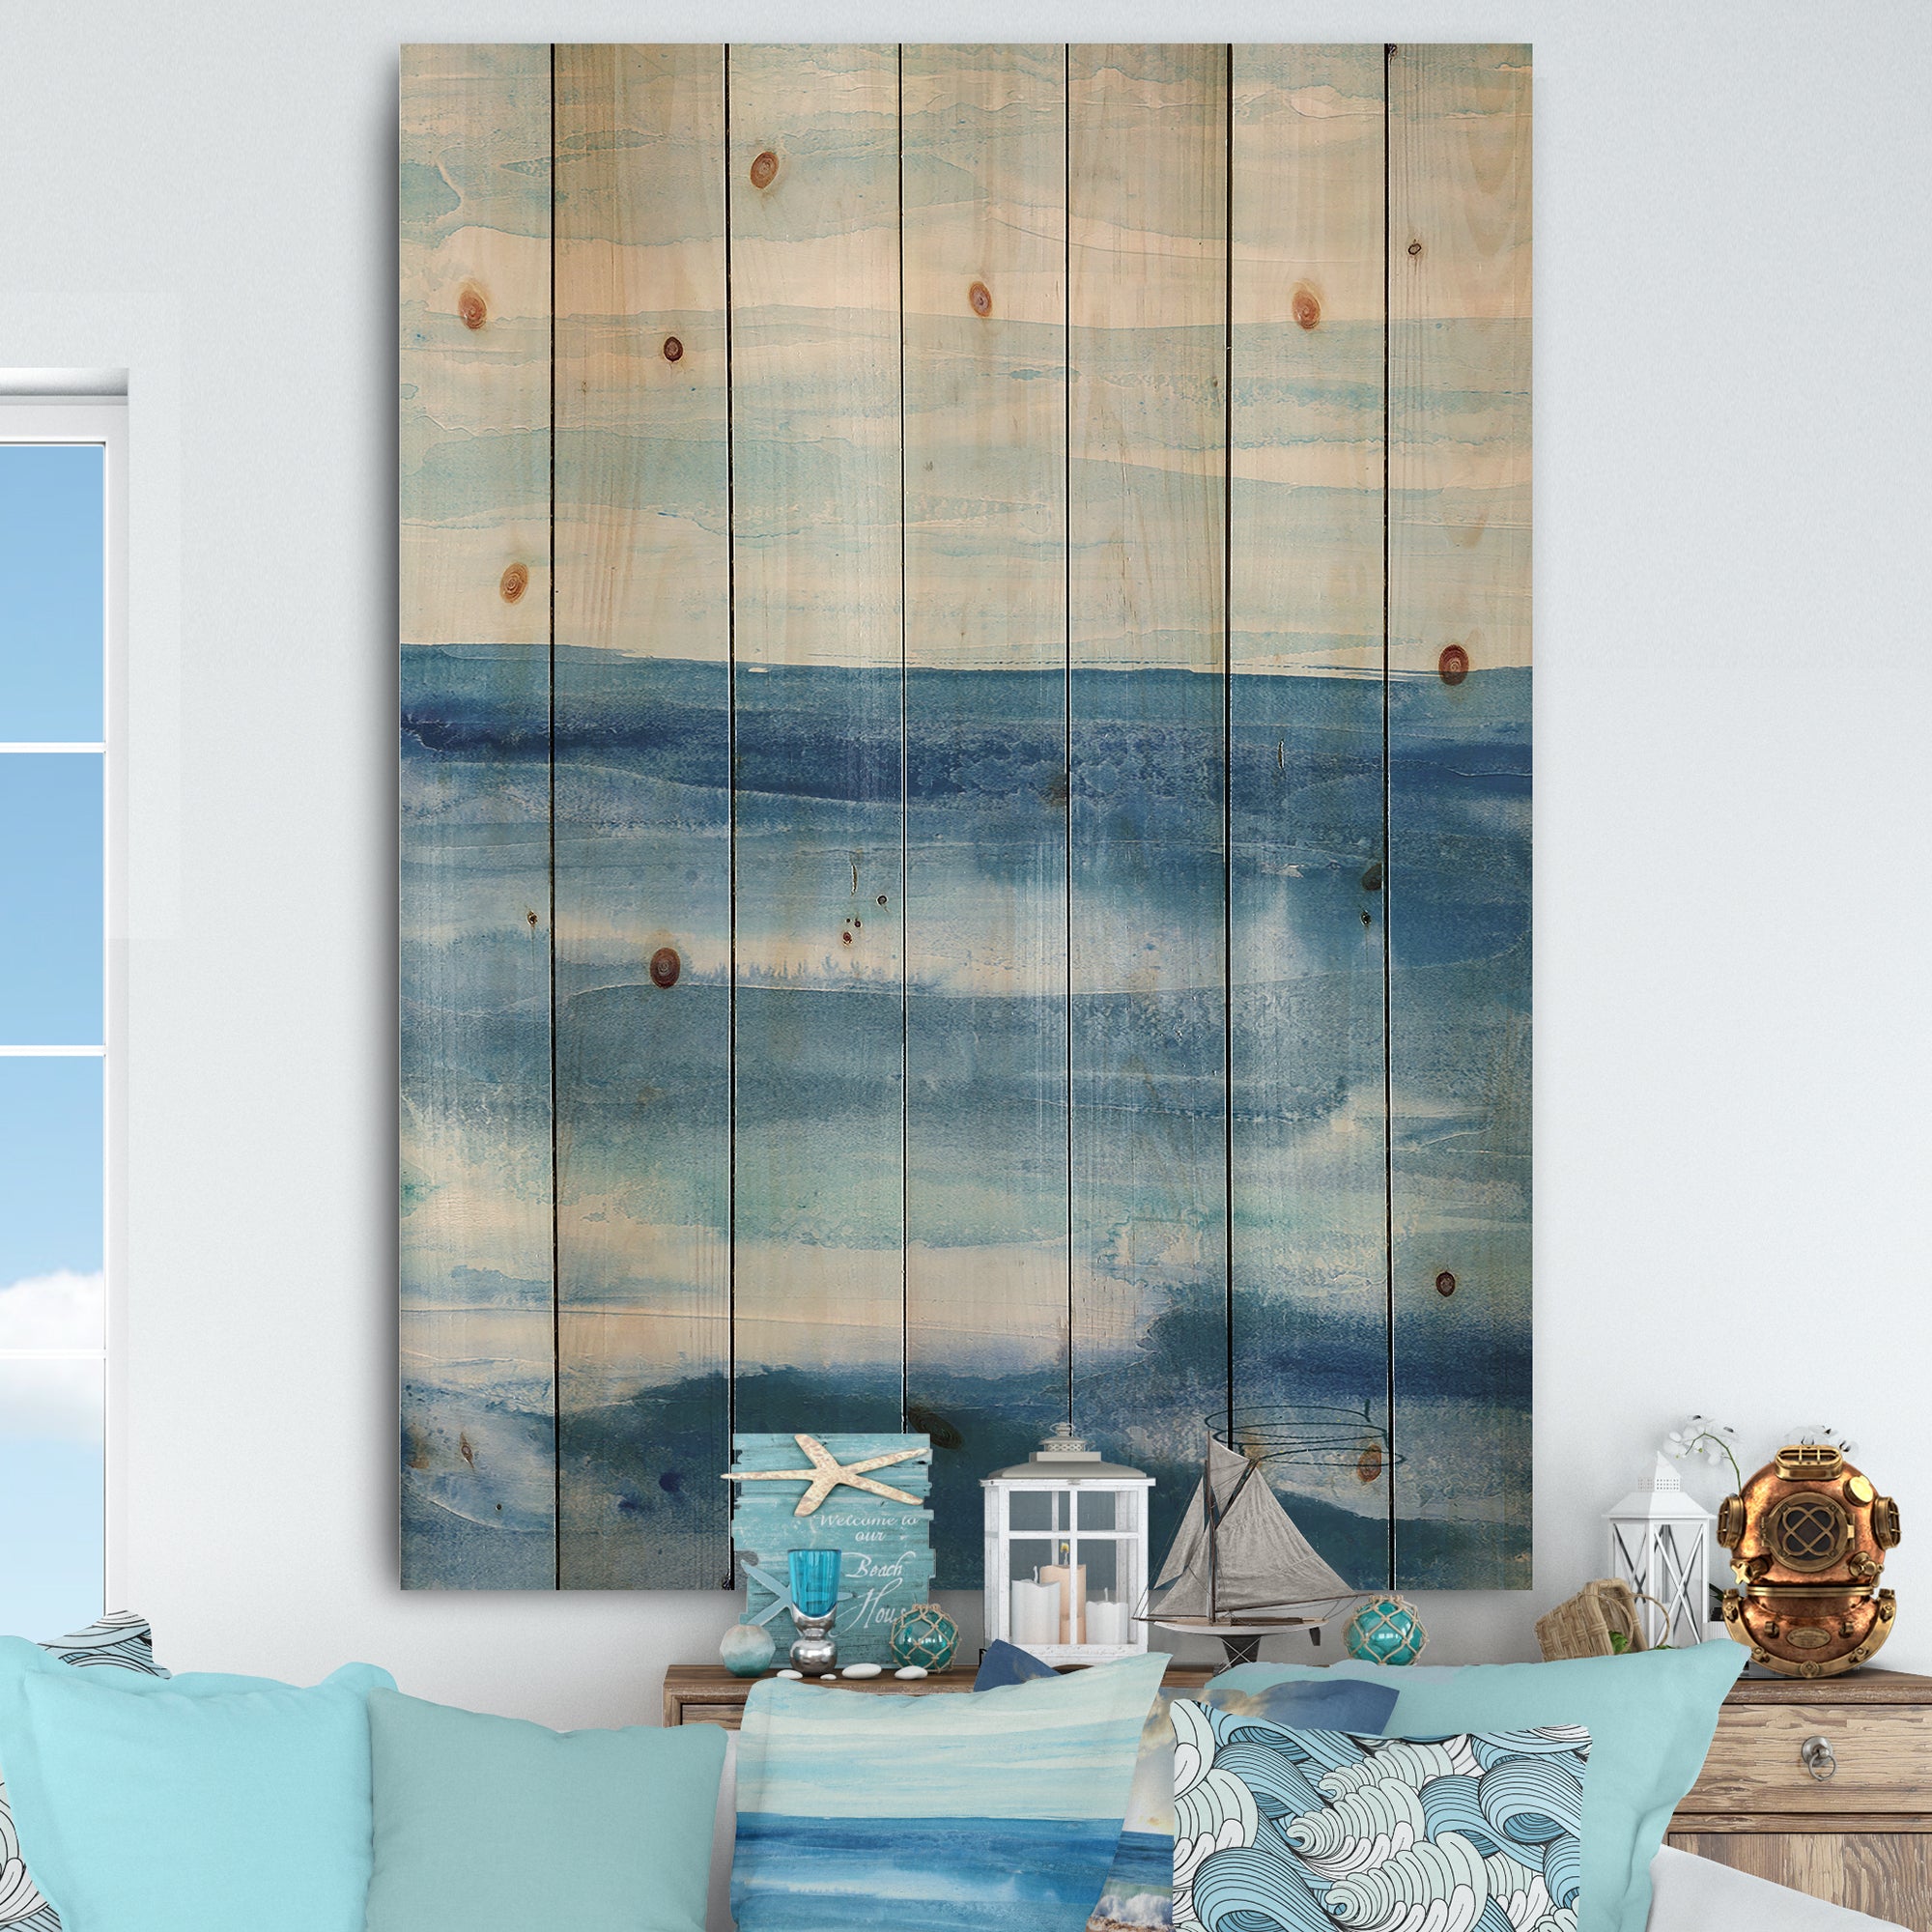 Lost in Blue Panel - Nautical & Coastal Print on Natural Pine Wood - 15x20